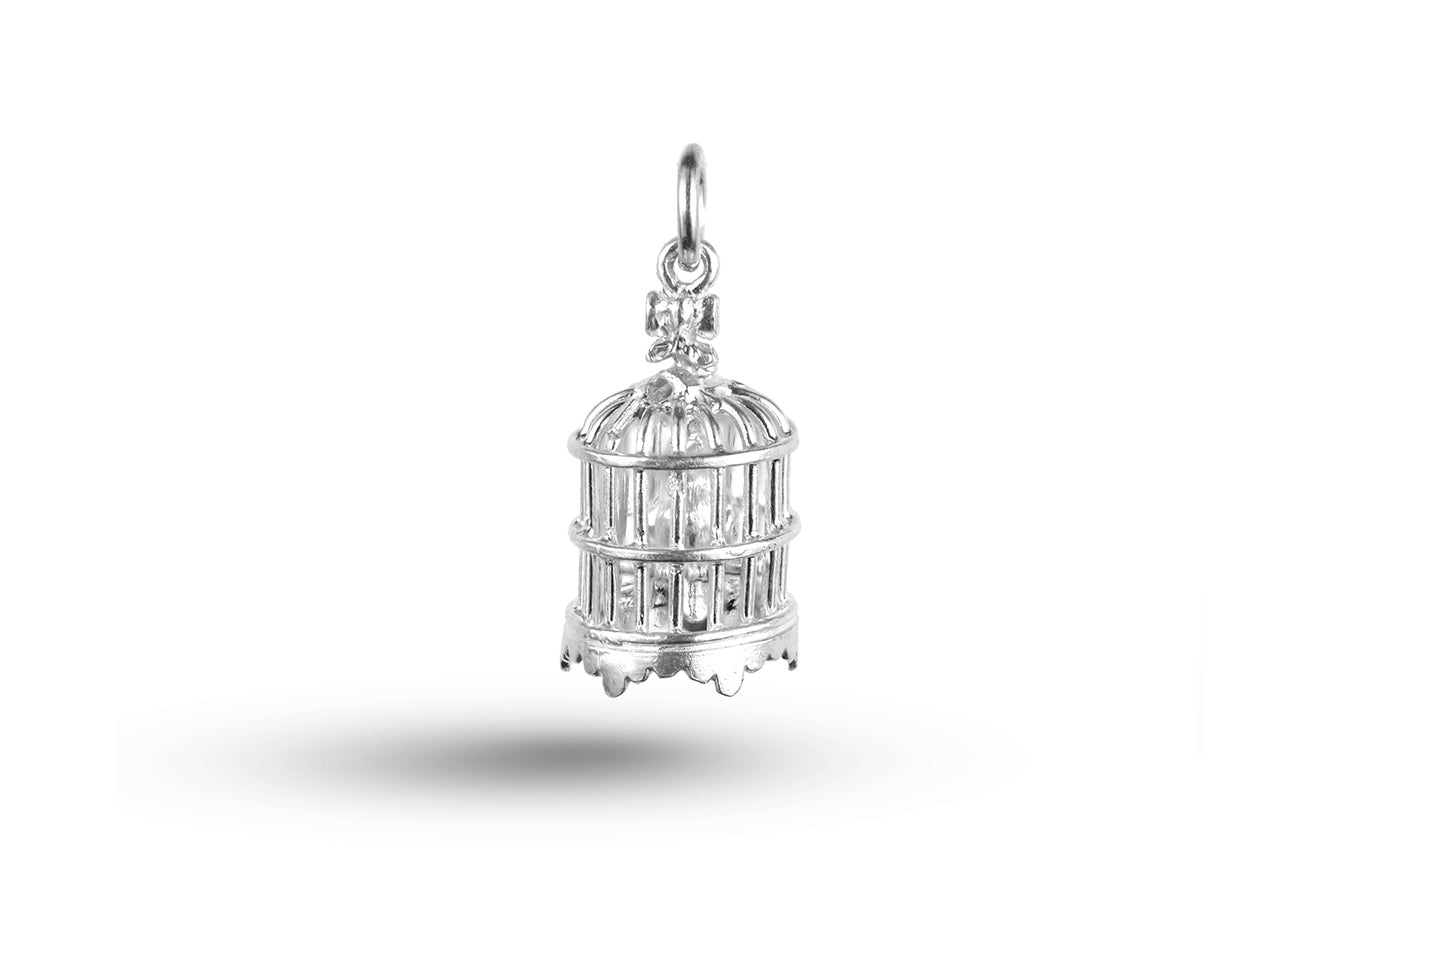 Luxury white gold Bird in Opening Cage charm.